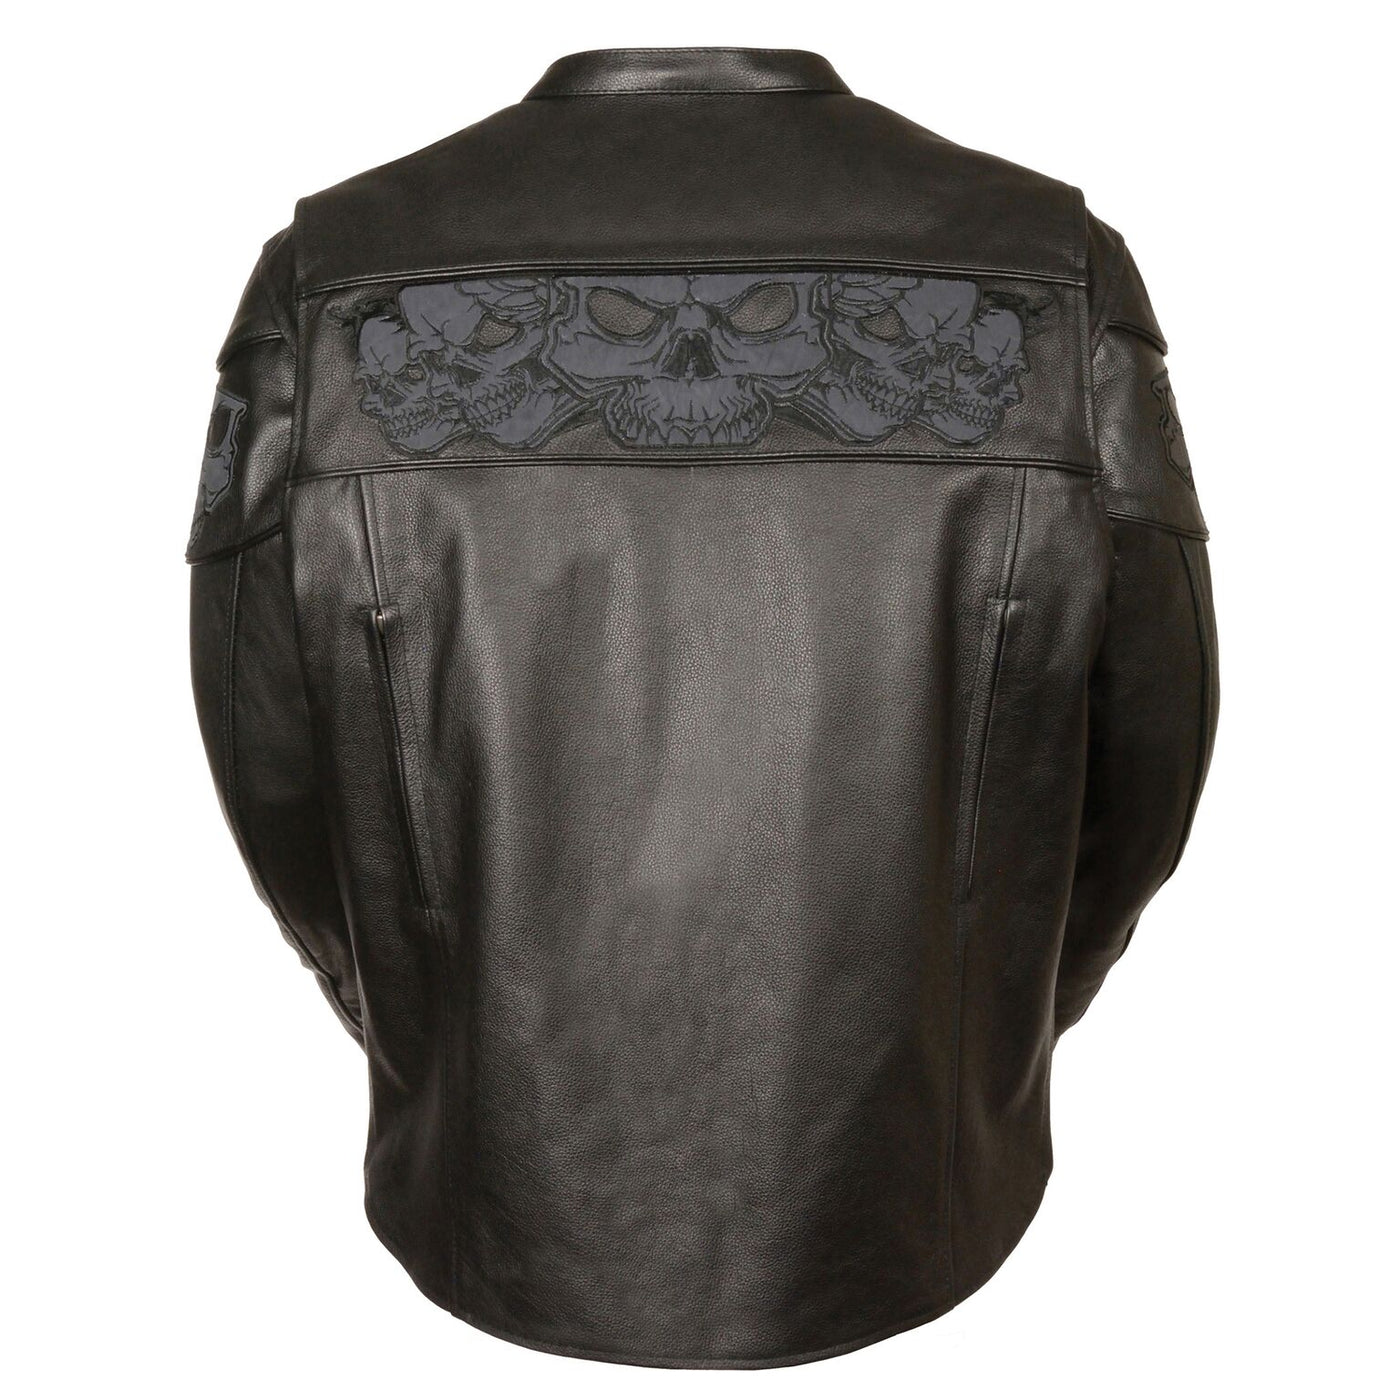 This heavy cowhide black leather motorcycle riding jacket has band of reflective skulls around the upper torso. It comes in sizes small through 5x and is available for purchase in our shop in Smyrna, TN, just outside Nashville.  It has multiple zippered pockets and vents and a zip out liner.  Back view showing zippered vents along back seams and reflective skulls across upper back.